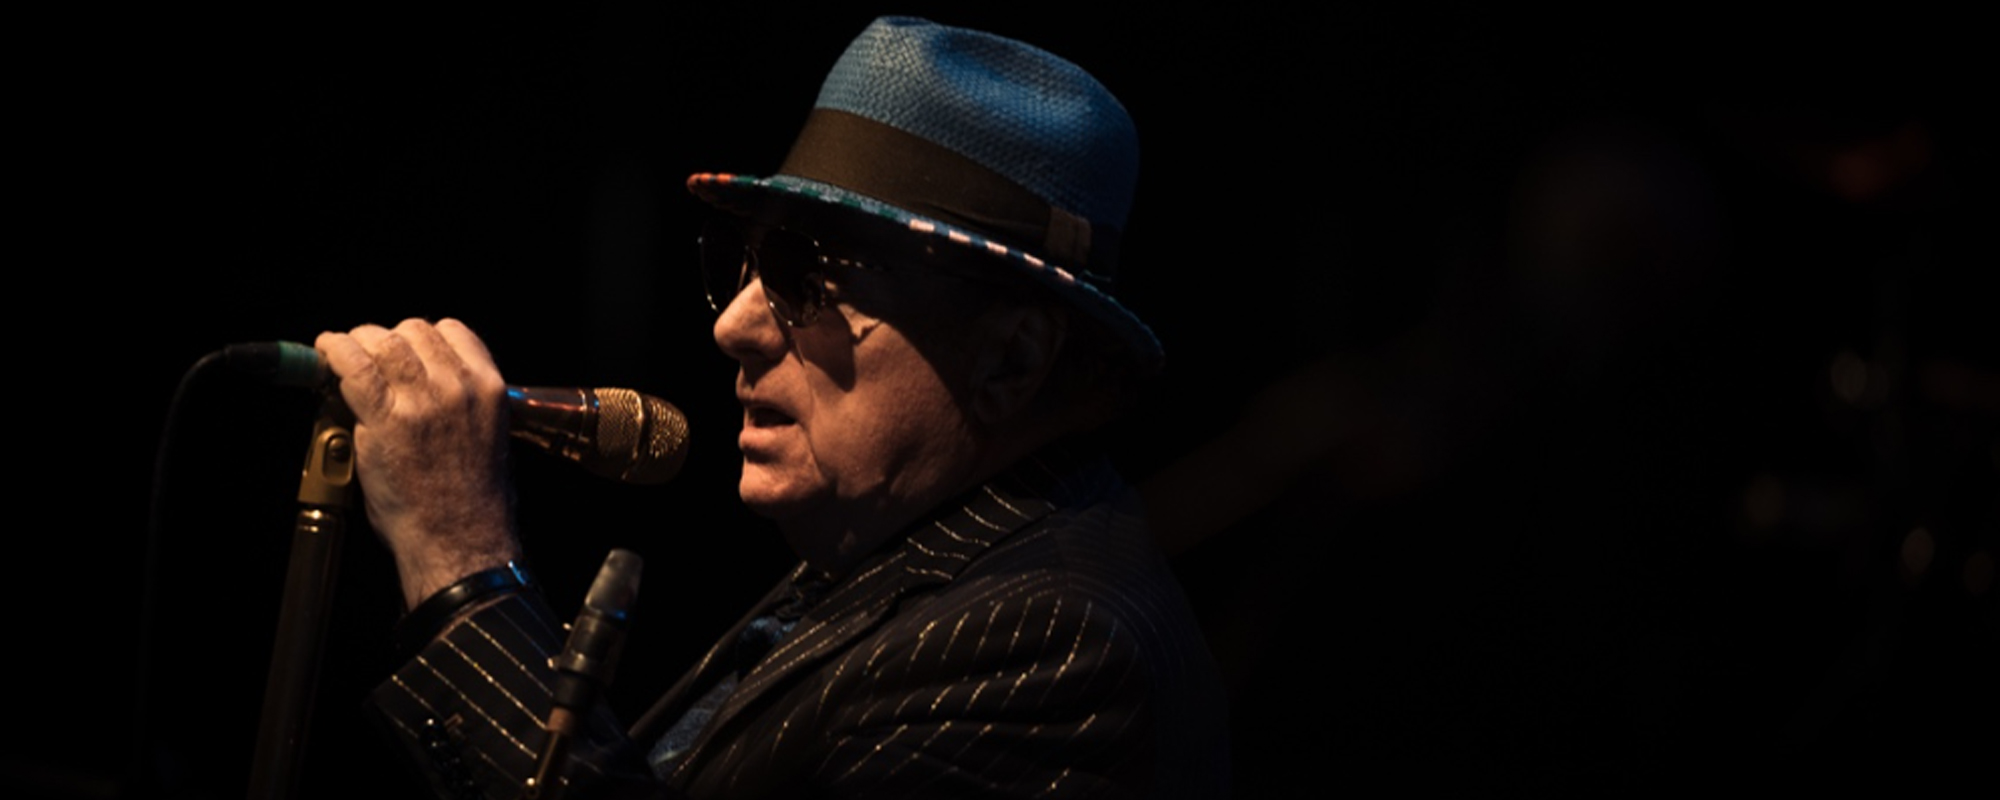 Review: Van Morrison Shows Reverence for Musical Traditions on ‘Latest Record Project’